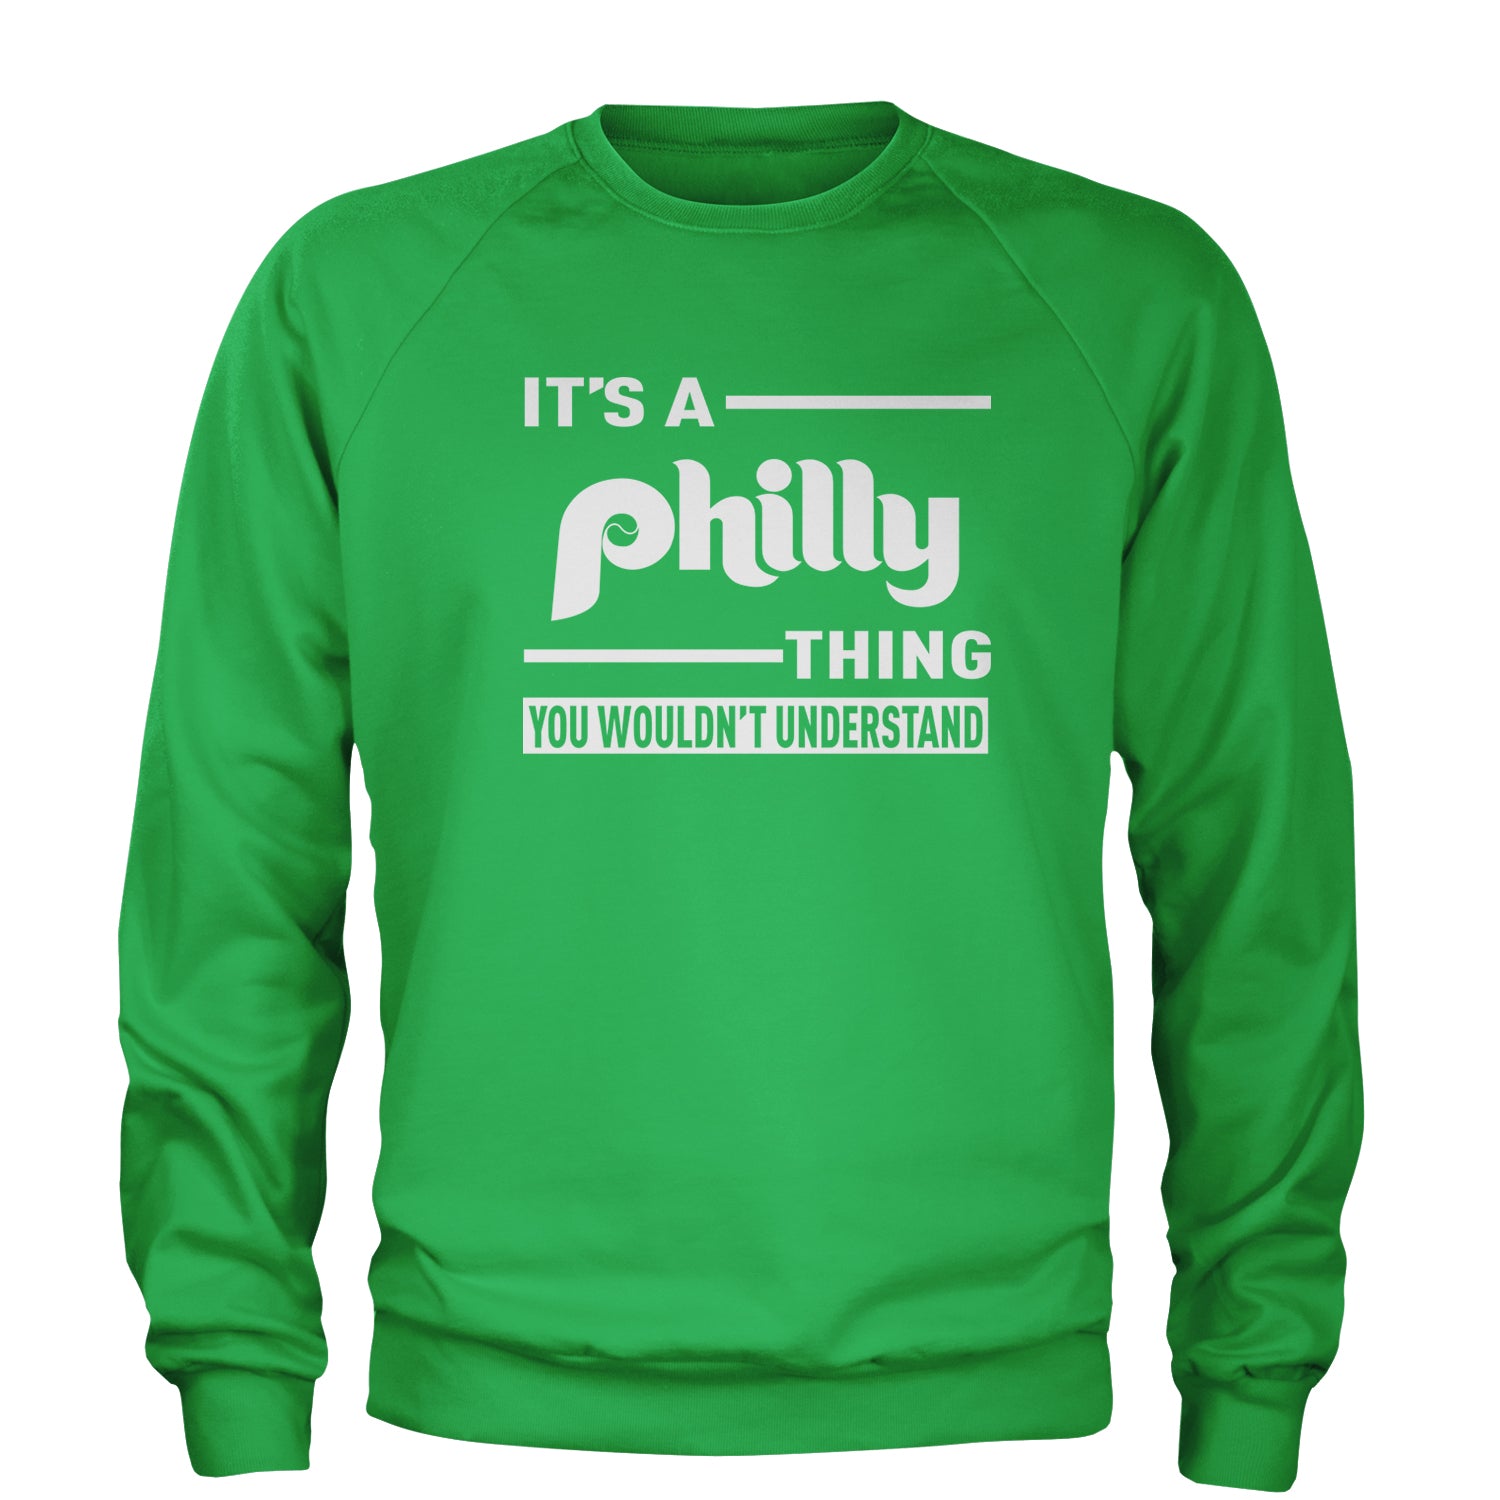 It's A Philly Thing, You Wouldn't Understand Adult Crewneck Sweatshirt baseball, filly, football, jawn, morgan, Philadelphia, philli by Expression Tees